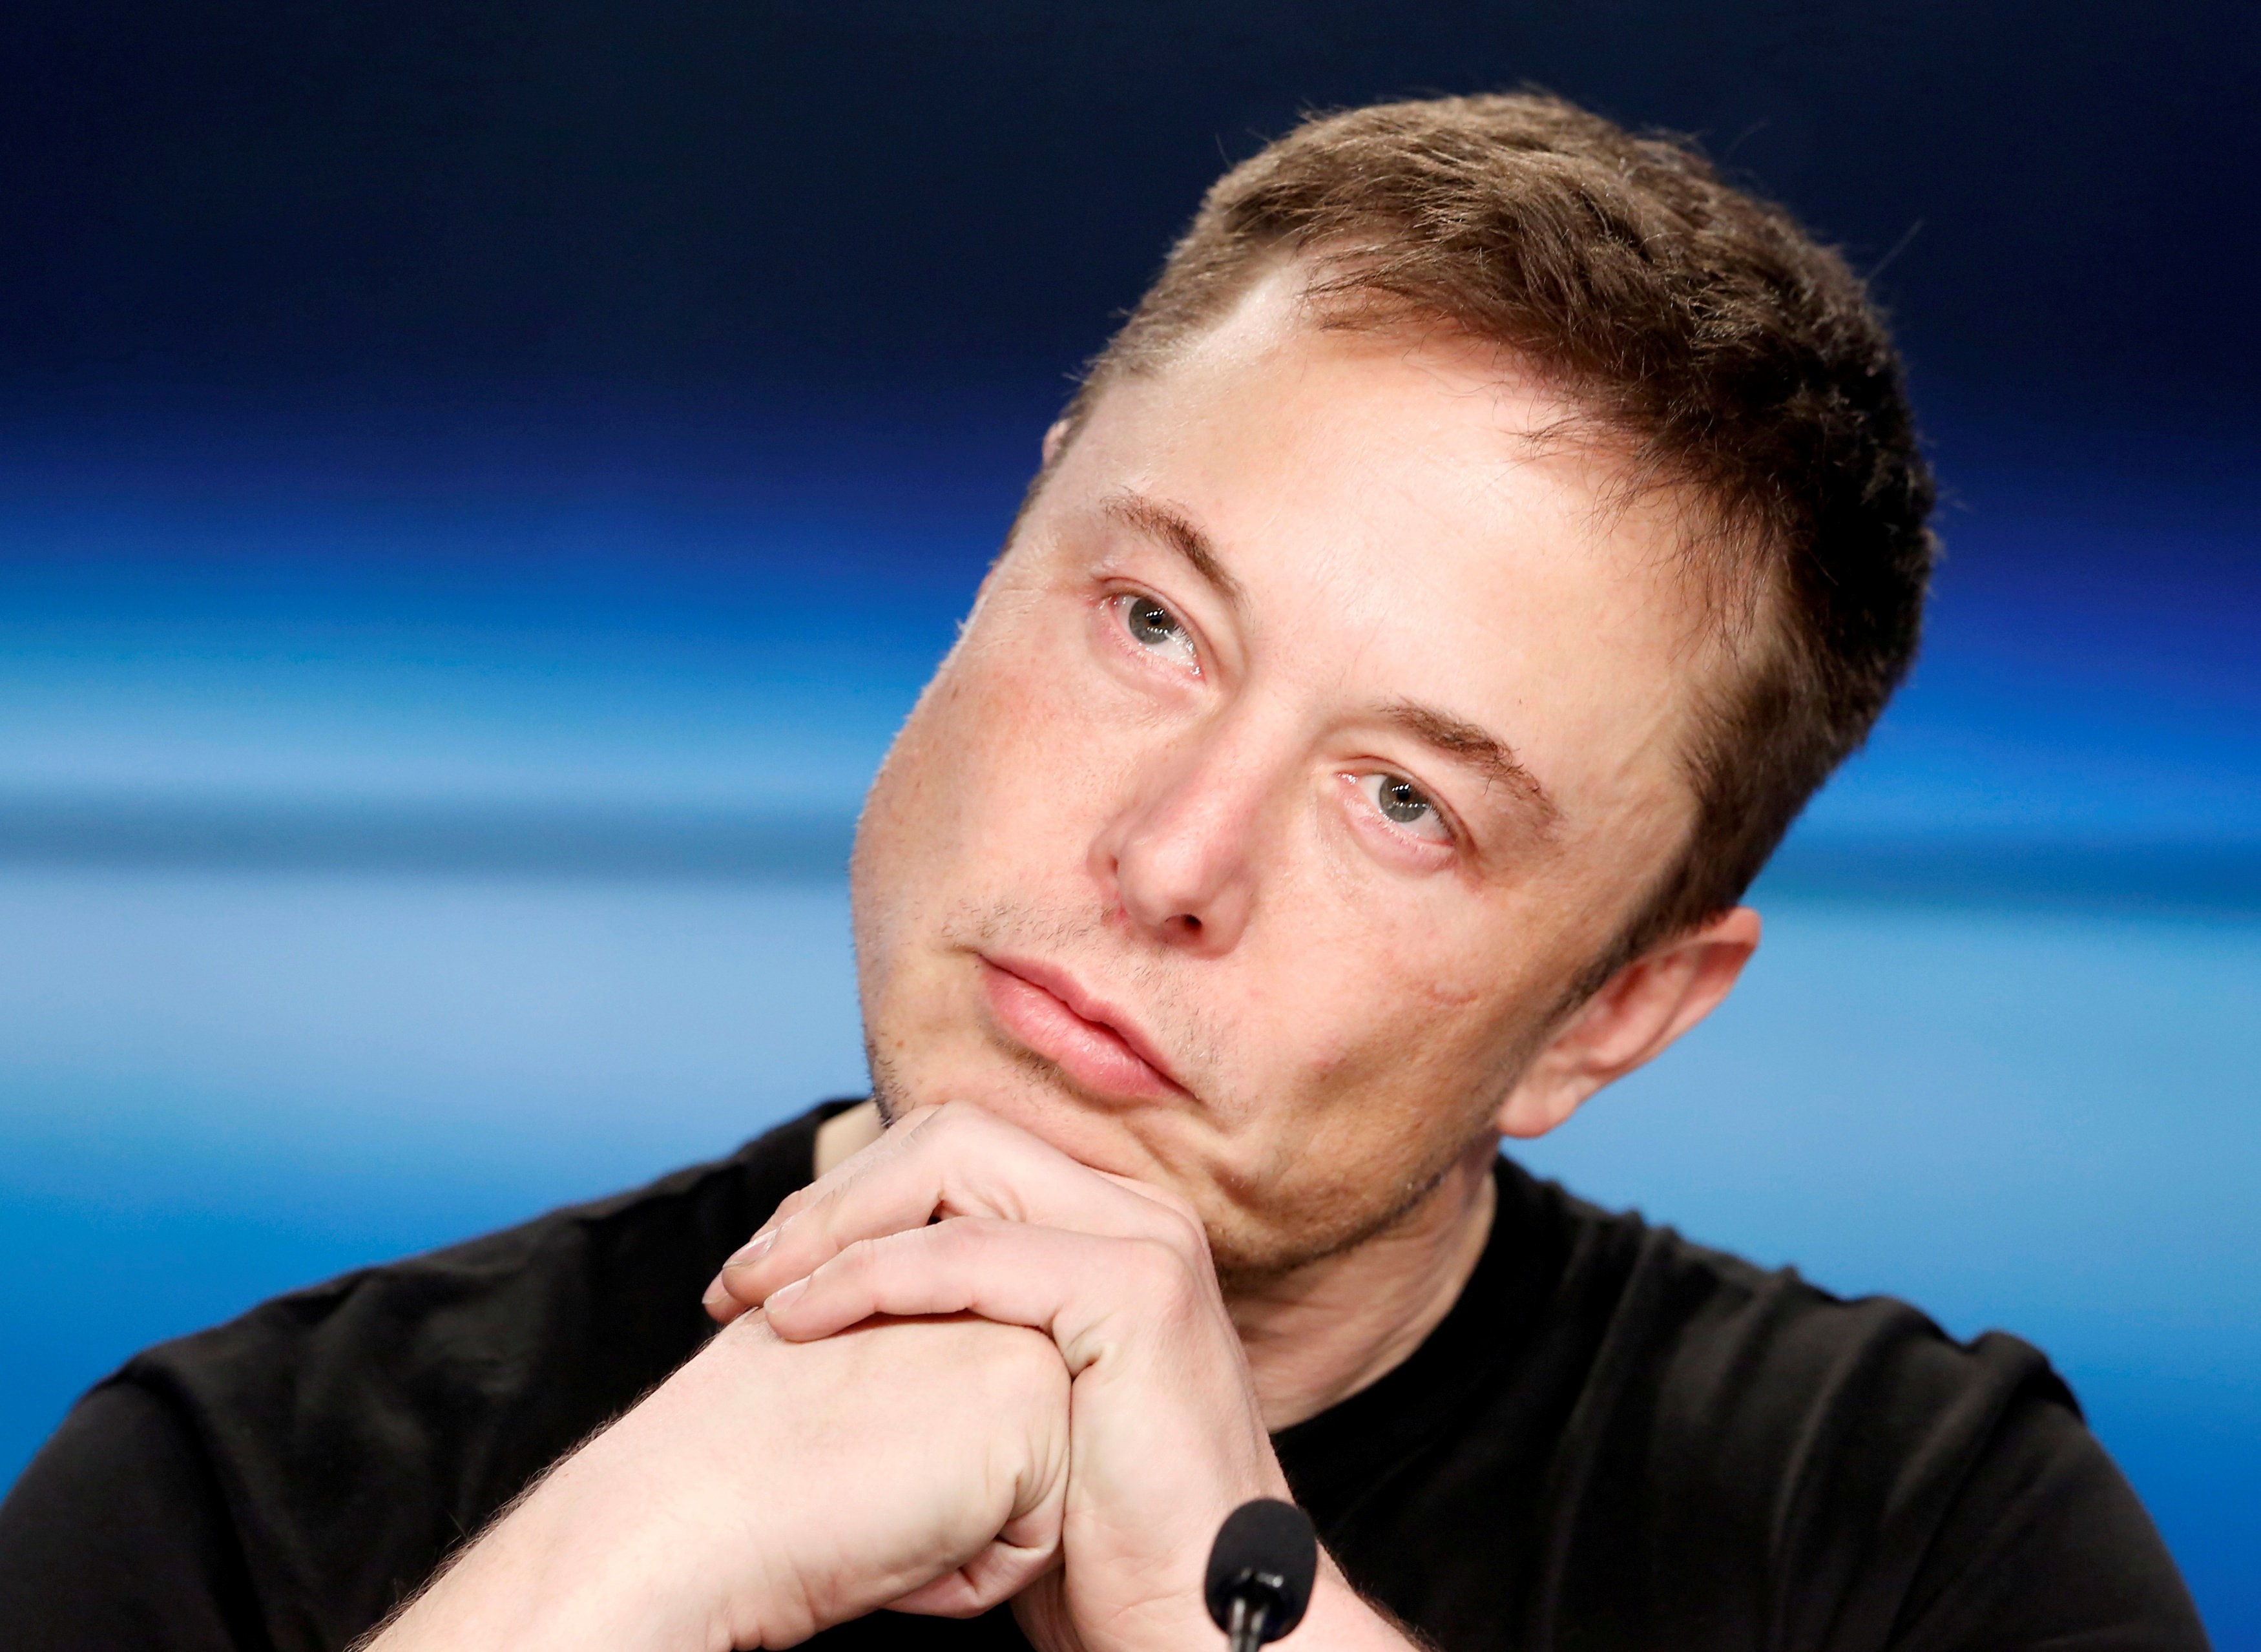 Elon Musk listens at a press conference following the first launch of a SpaceX Falcon Heavy rocket at the Kennedy Space Centre in Cape Canaveral, Florida, on February 6. Musk recently caused a flurry when he tweeted his intention to take Tesla, the carmaker he founded, private. Photo: Reuters